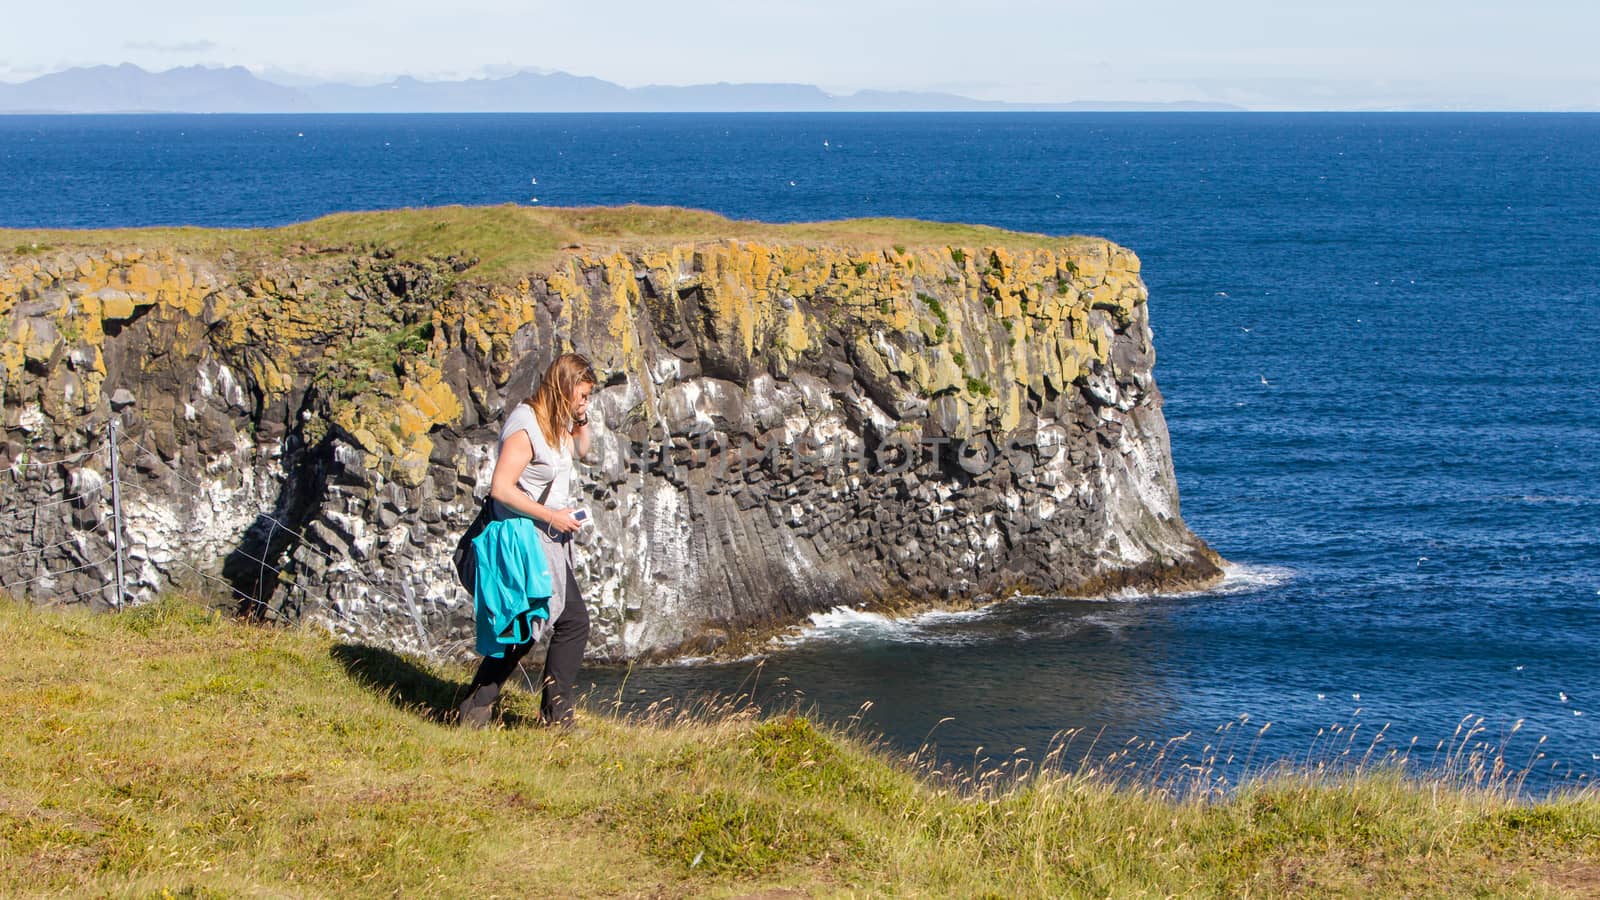 Woman on the edge of the cliff - Iceland by michaklootwijk